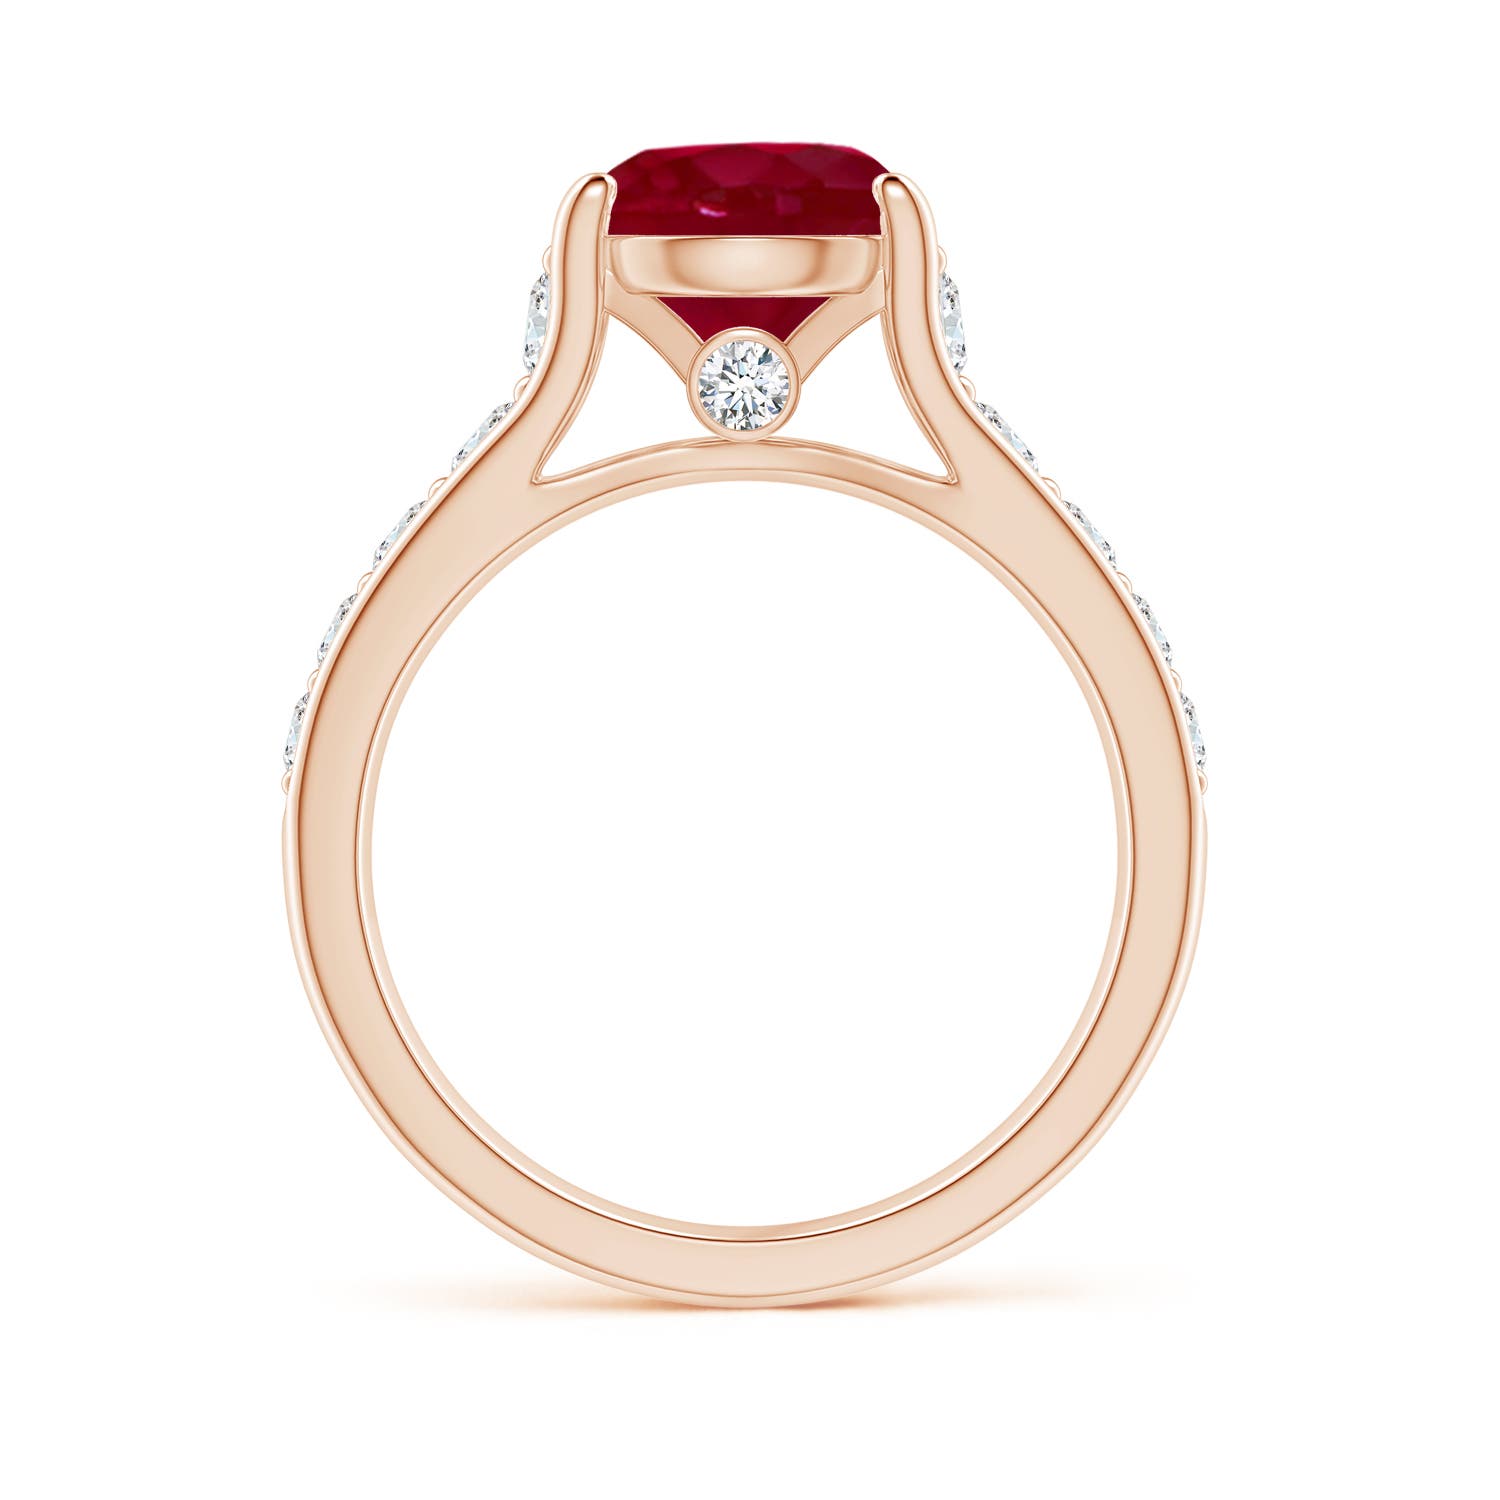 AA - Ruby / 2.8 CT / 14 KT Rose Gold